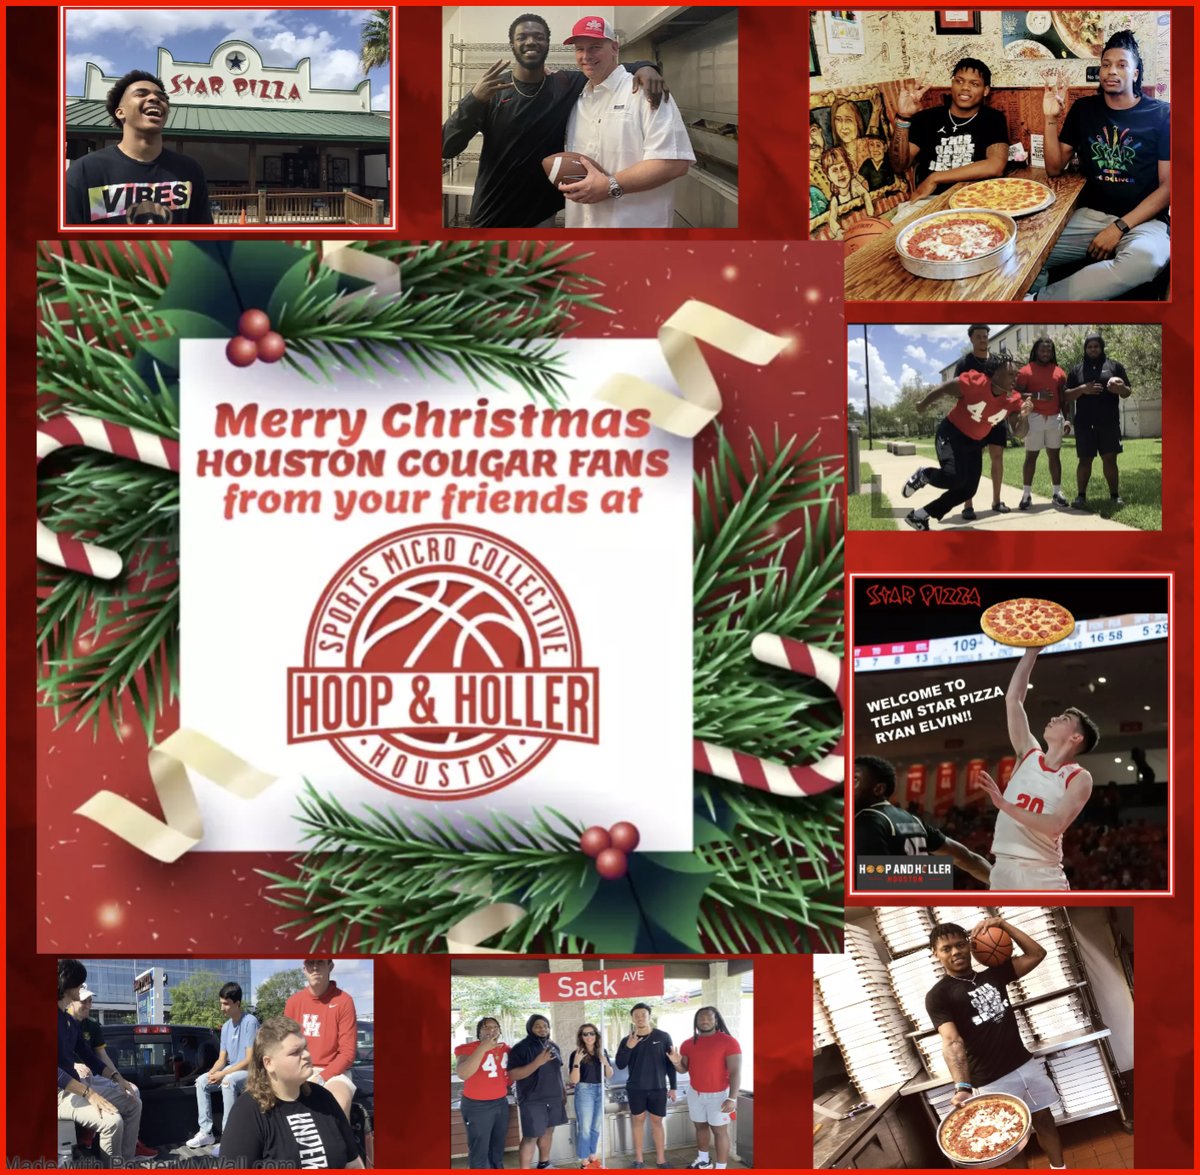 Merry Christmas from your friends @ HOOP & HOLLER HOUSTON ! #GoCoogs #Christmas #Big12 #ncaa #basketball #culture #football #Houston #Cougars